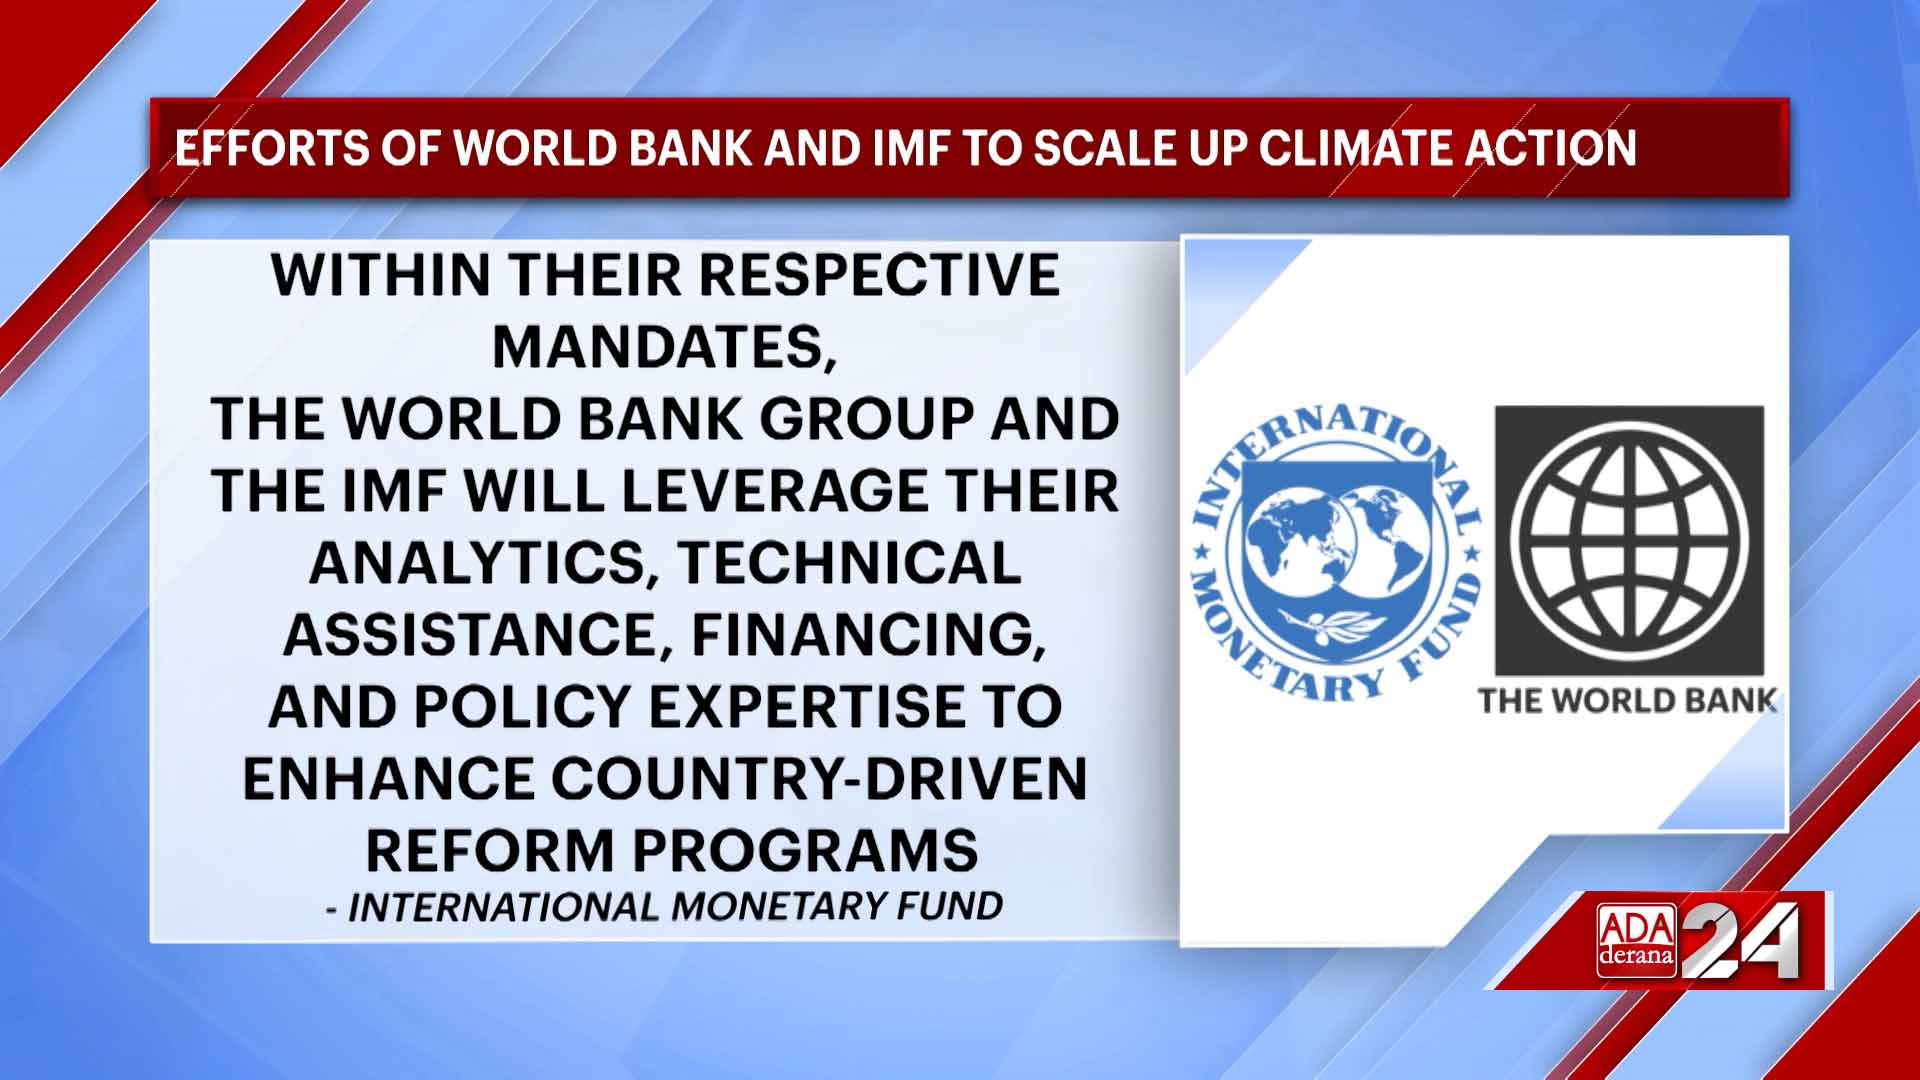 World Bank and IMF deepen effort to scale up climate action (English)